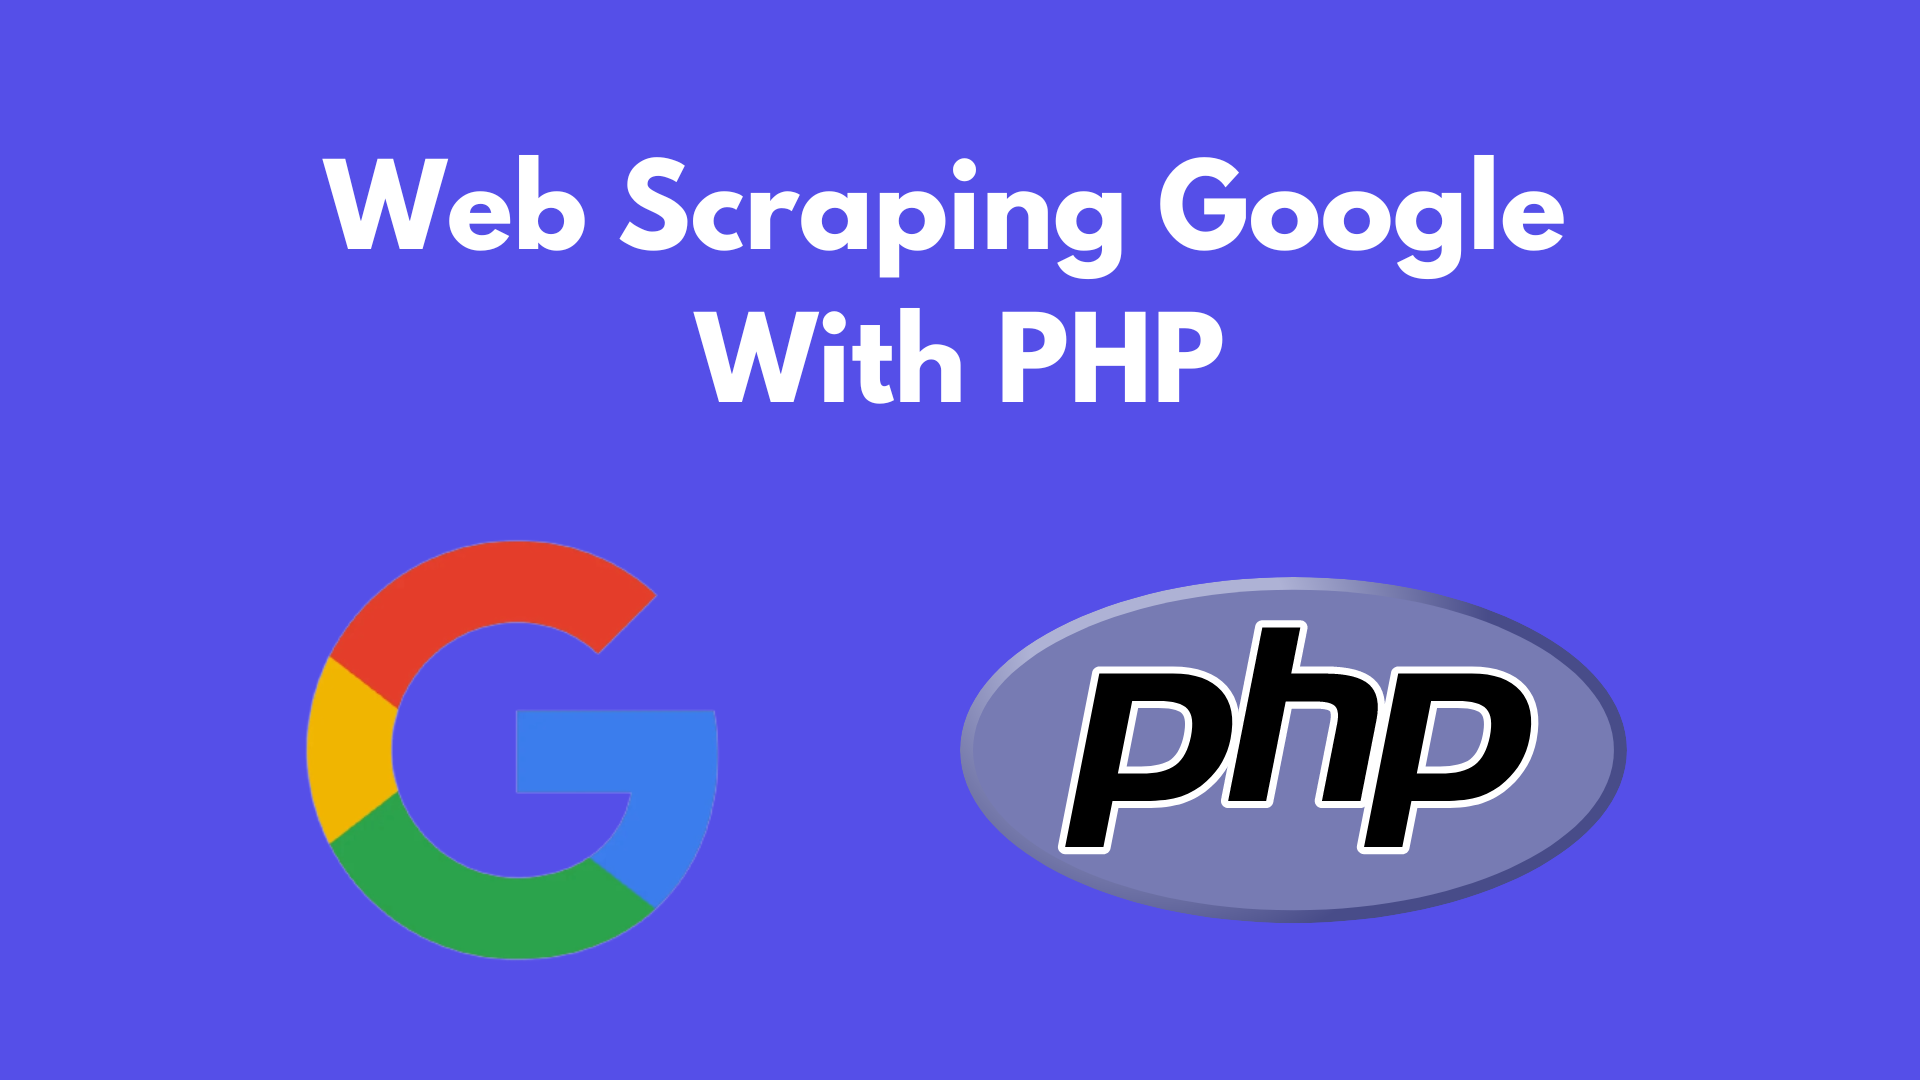 Scraping Google Search Results Using PHP